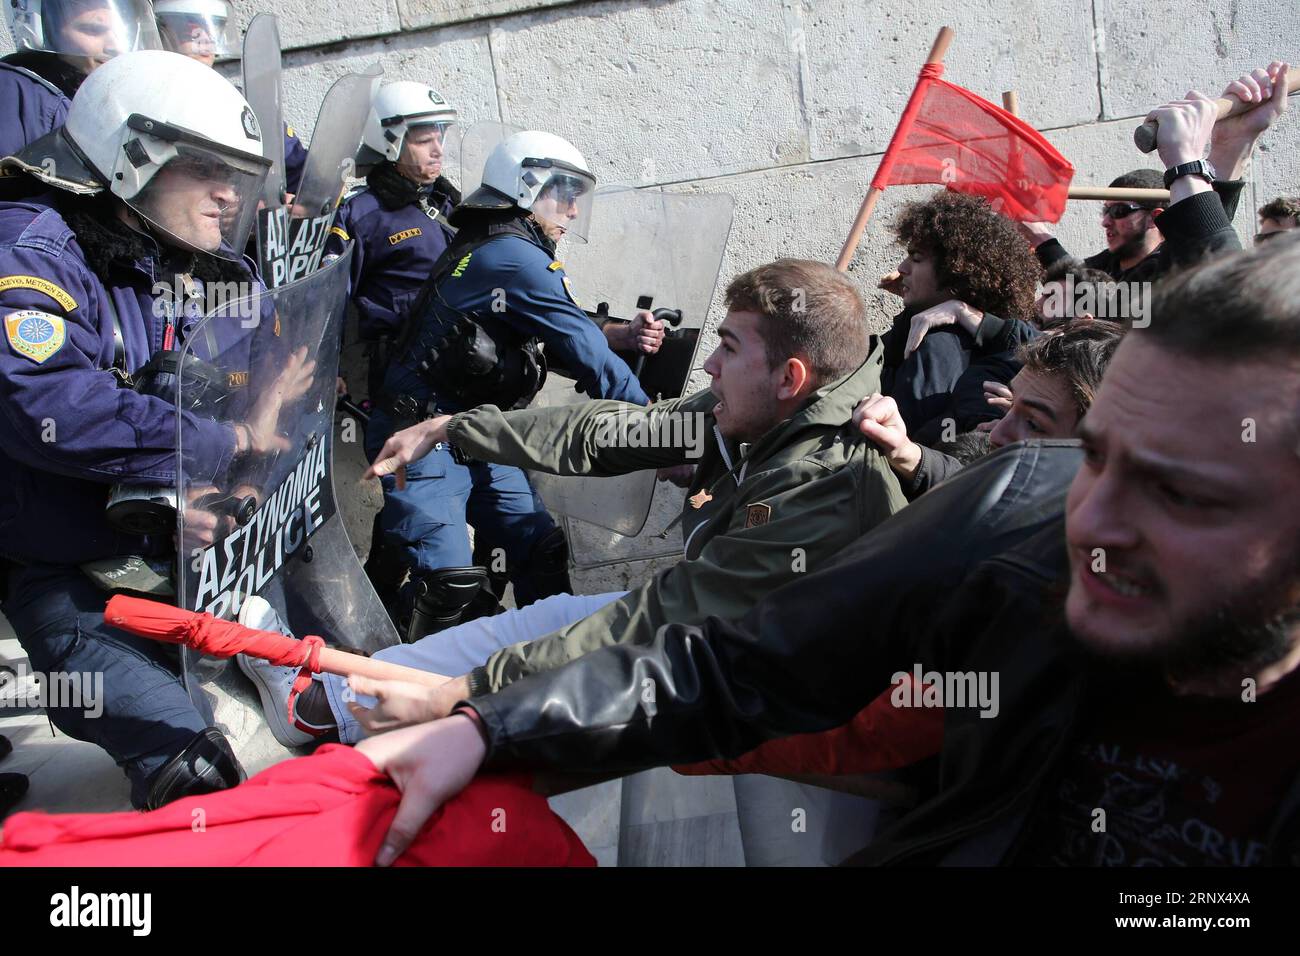 (180112) -- ATHENS, Jan. 12, 2018 -- Protesters clash with riot police outside the parliament building during a demonstration against a new austerity bill in Athens, Greece, on Jan. 12, 2018. Greek labor unions staged a first round of strikes and protests on Friday over the new austerity bill debated in parliament which, among other measures, tightens conditions for calling strikes. ) GREECE-ATHENS-LABOR UNIONS-PROTEST-AUSTERITY BILL MariosxLolos PUBLICATIONxNOTxINxCHN Stock Photo